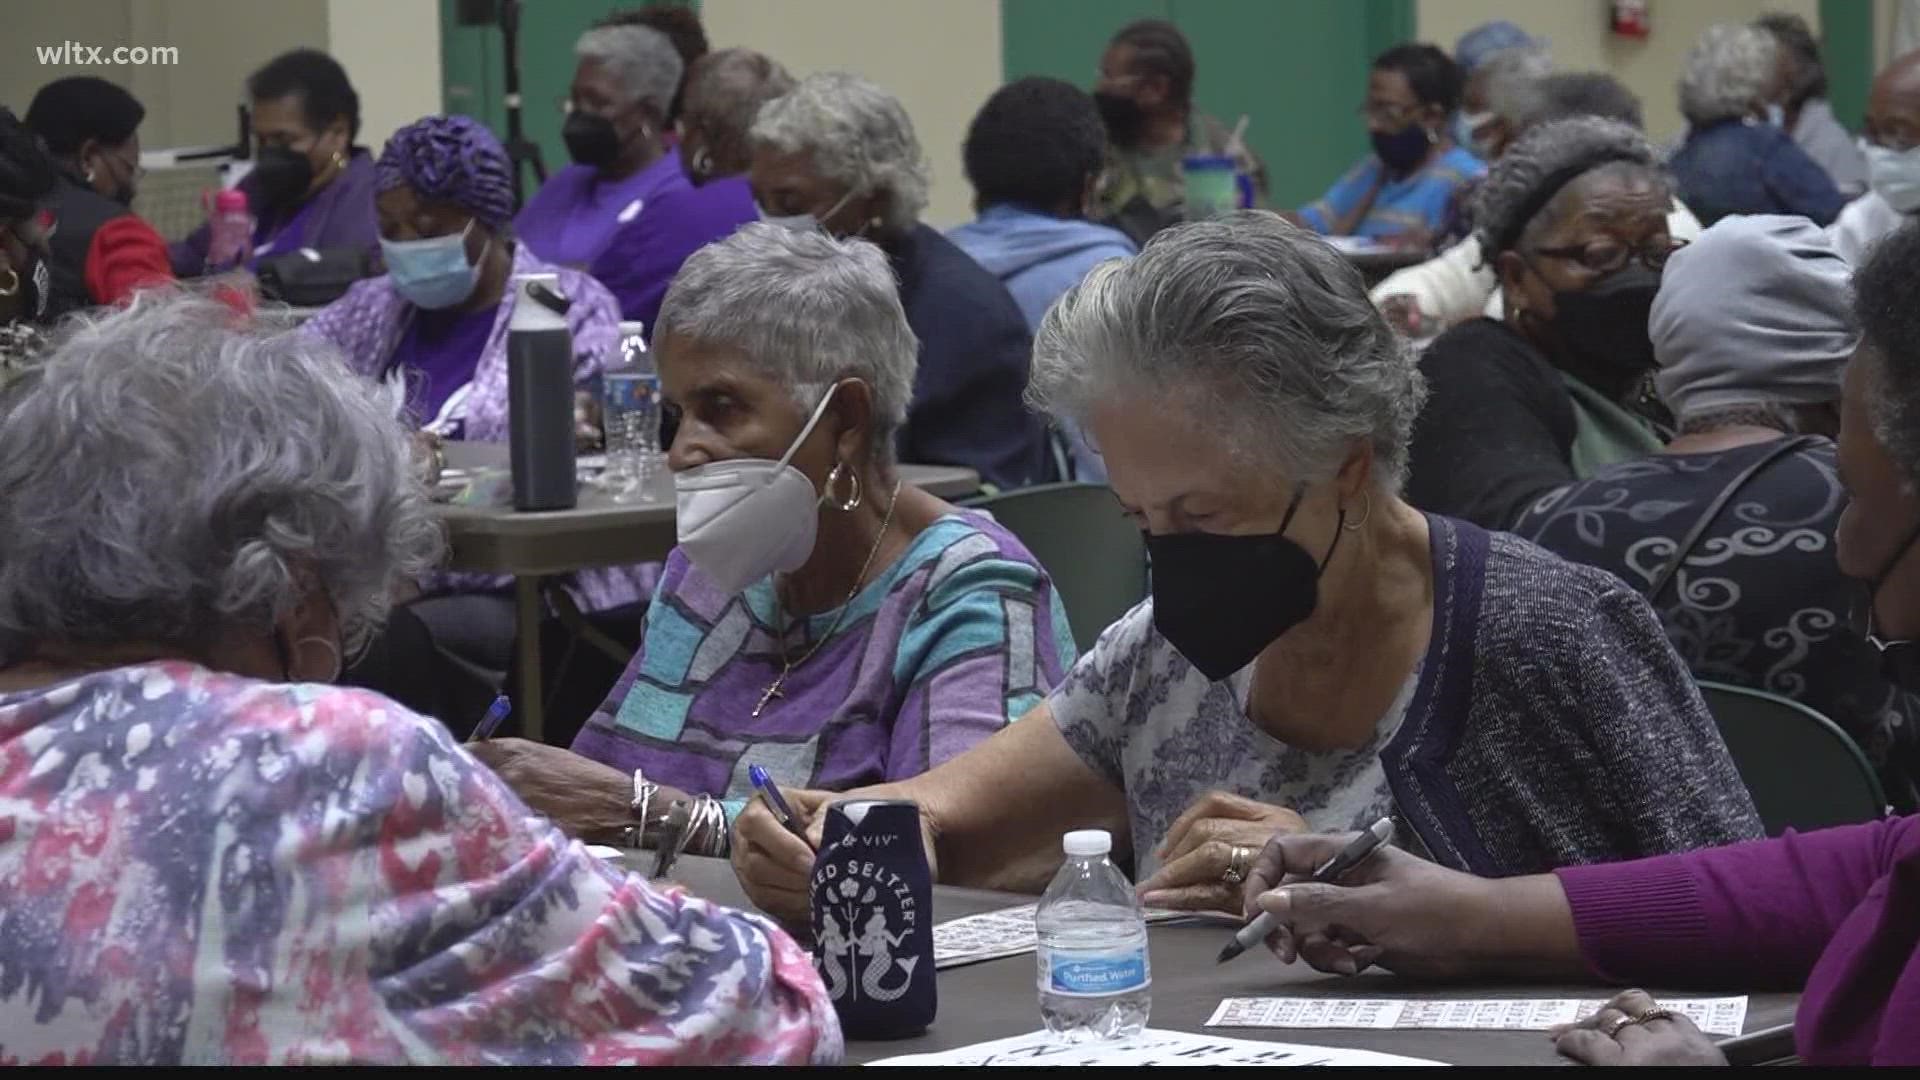 Almost 100 senior citizens from across the county came to the event at South Hope Center on Wednesday for the first time since before the COVID-19 pandemic began.